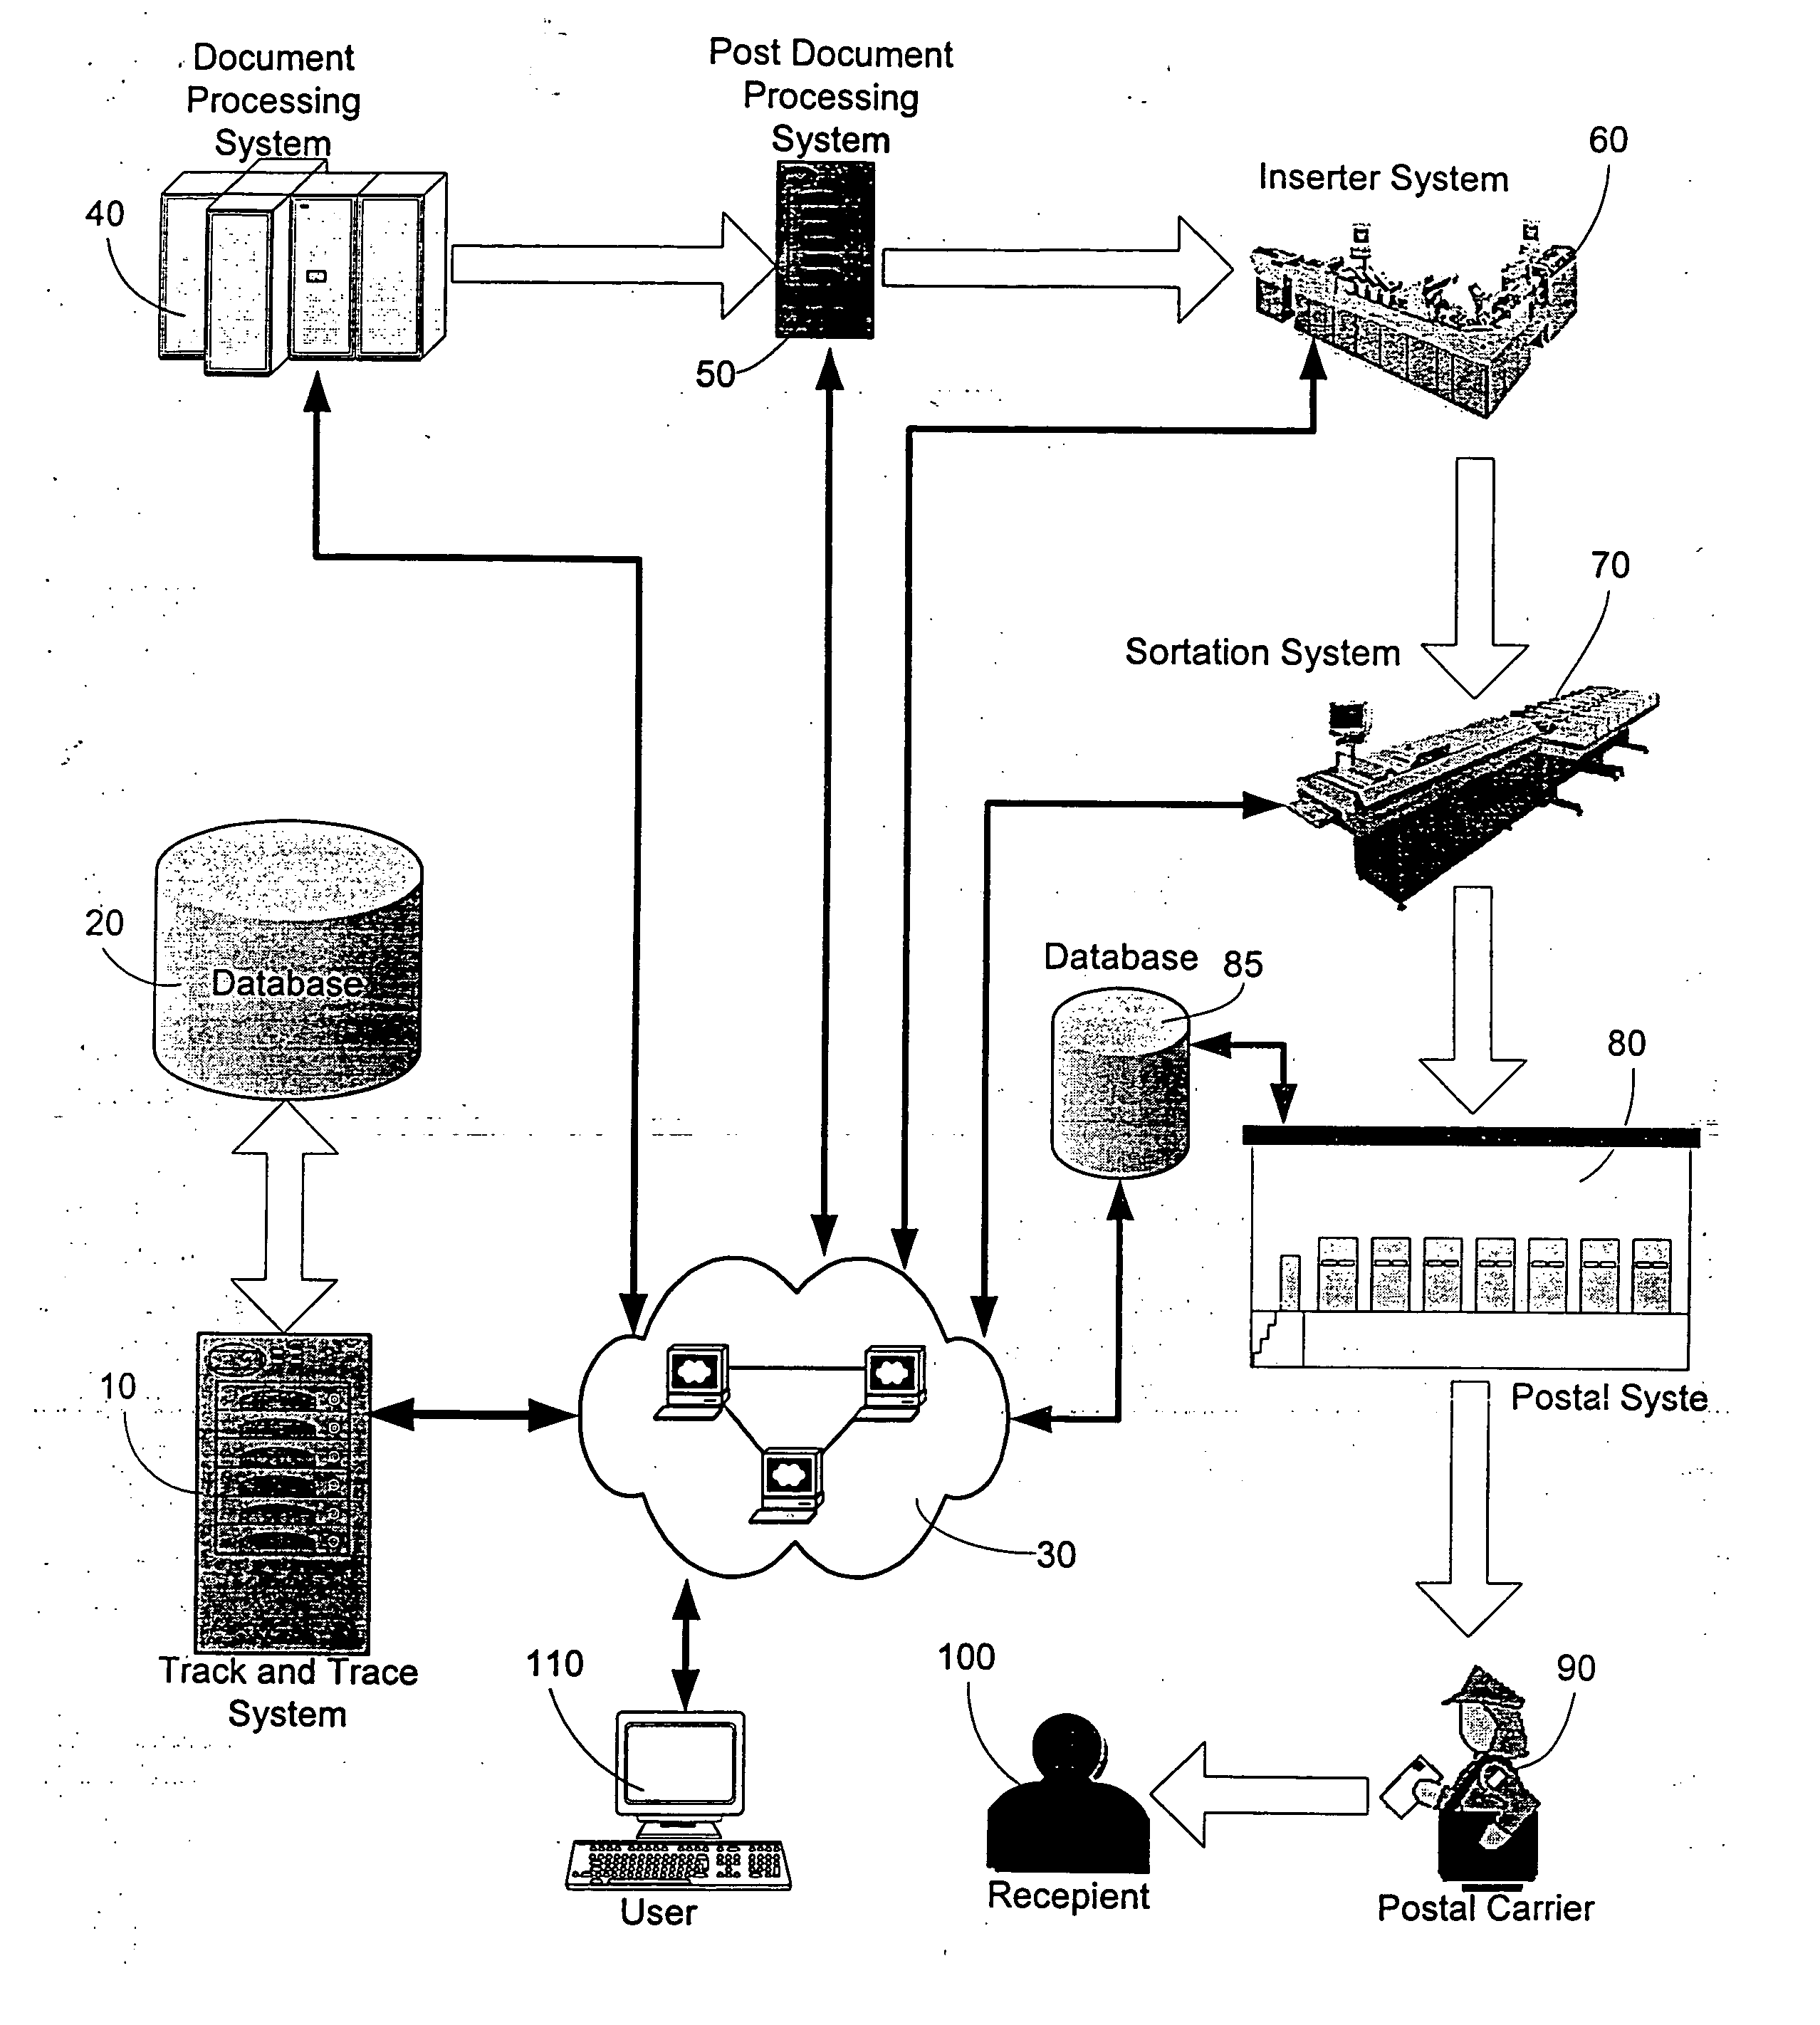 Method for generating mailpieces and storing mailpiece identification and tracking information